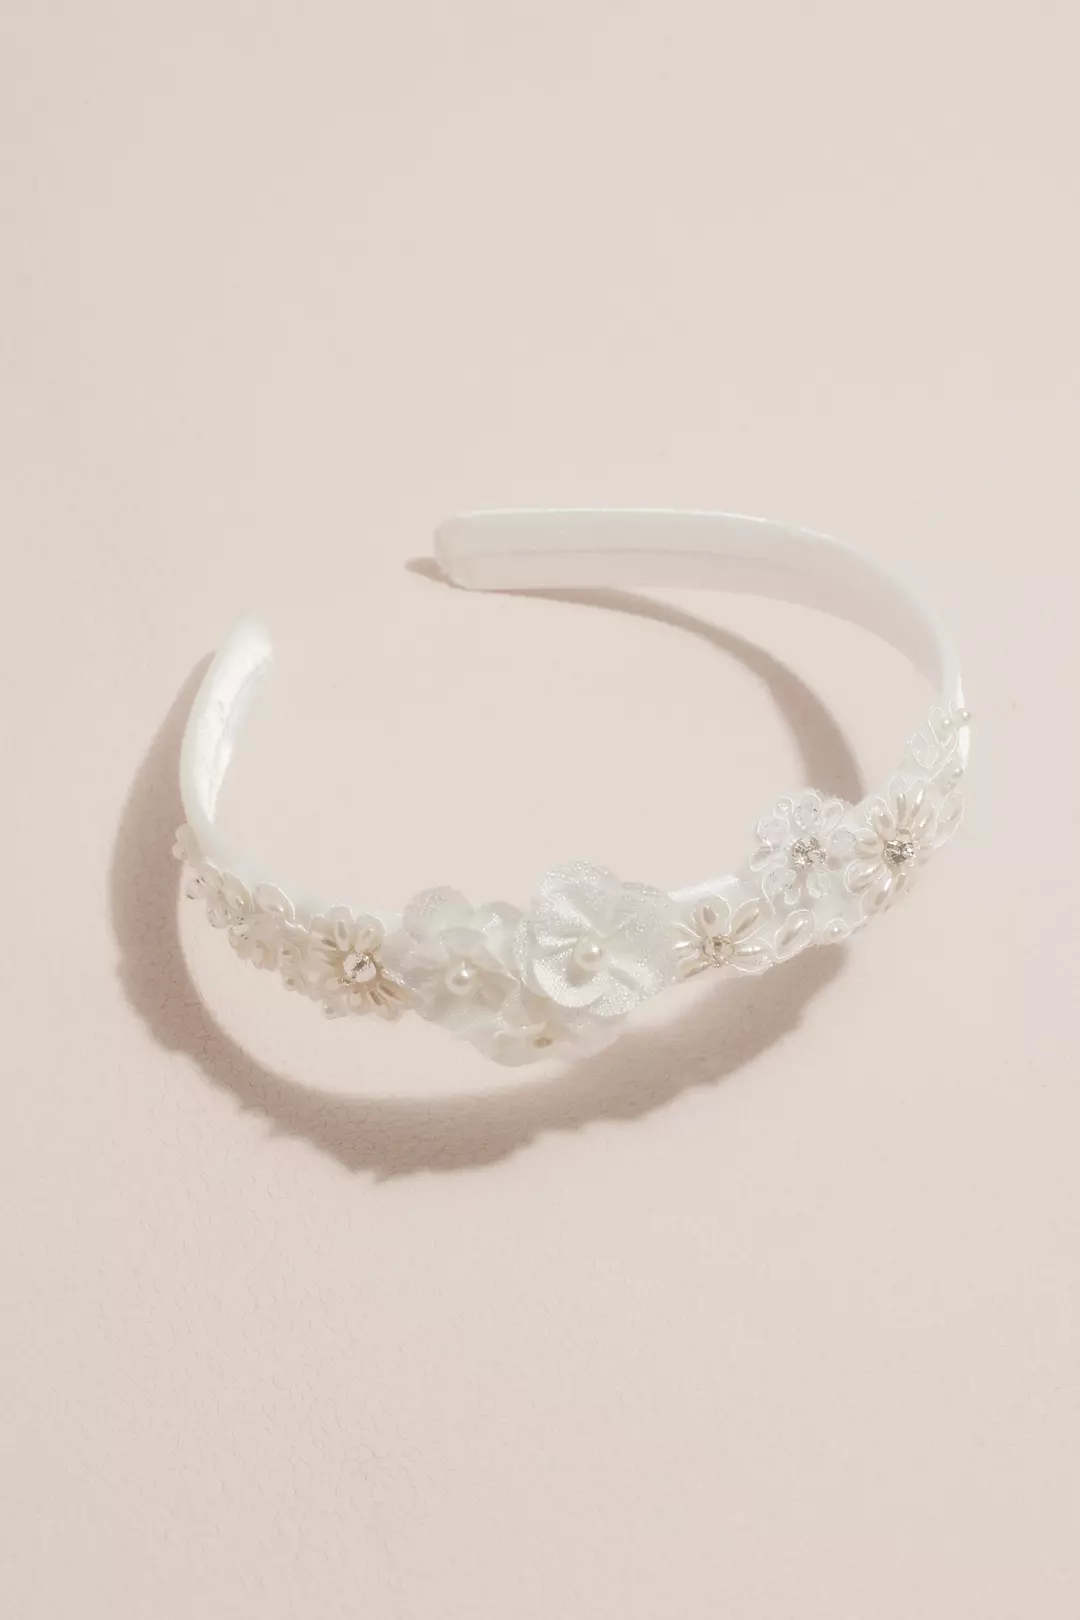 Floral Lace and Ribbon Rose Flower Girl Headband Image